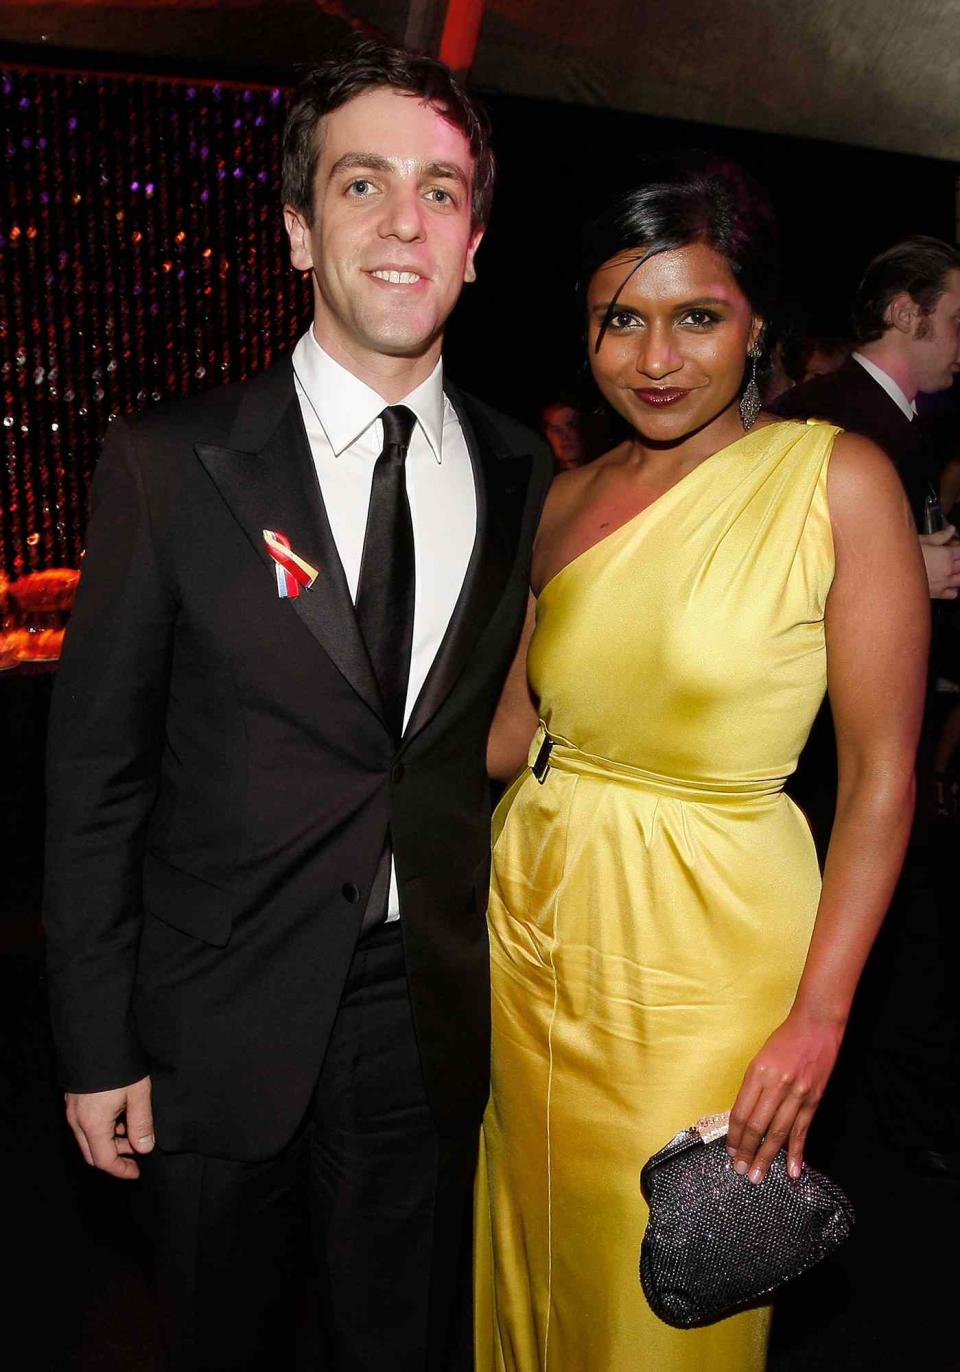 B.J. Novak (L) and actress Mindy Kaling attend the NBC Universal and Focus Features' Golden Globes after party sponsored by Cartier at Beverly Hilton Hotel on January 17, 2010 in Beverly Hills, California